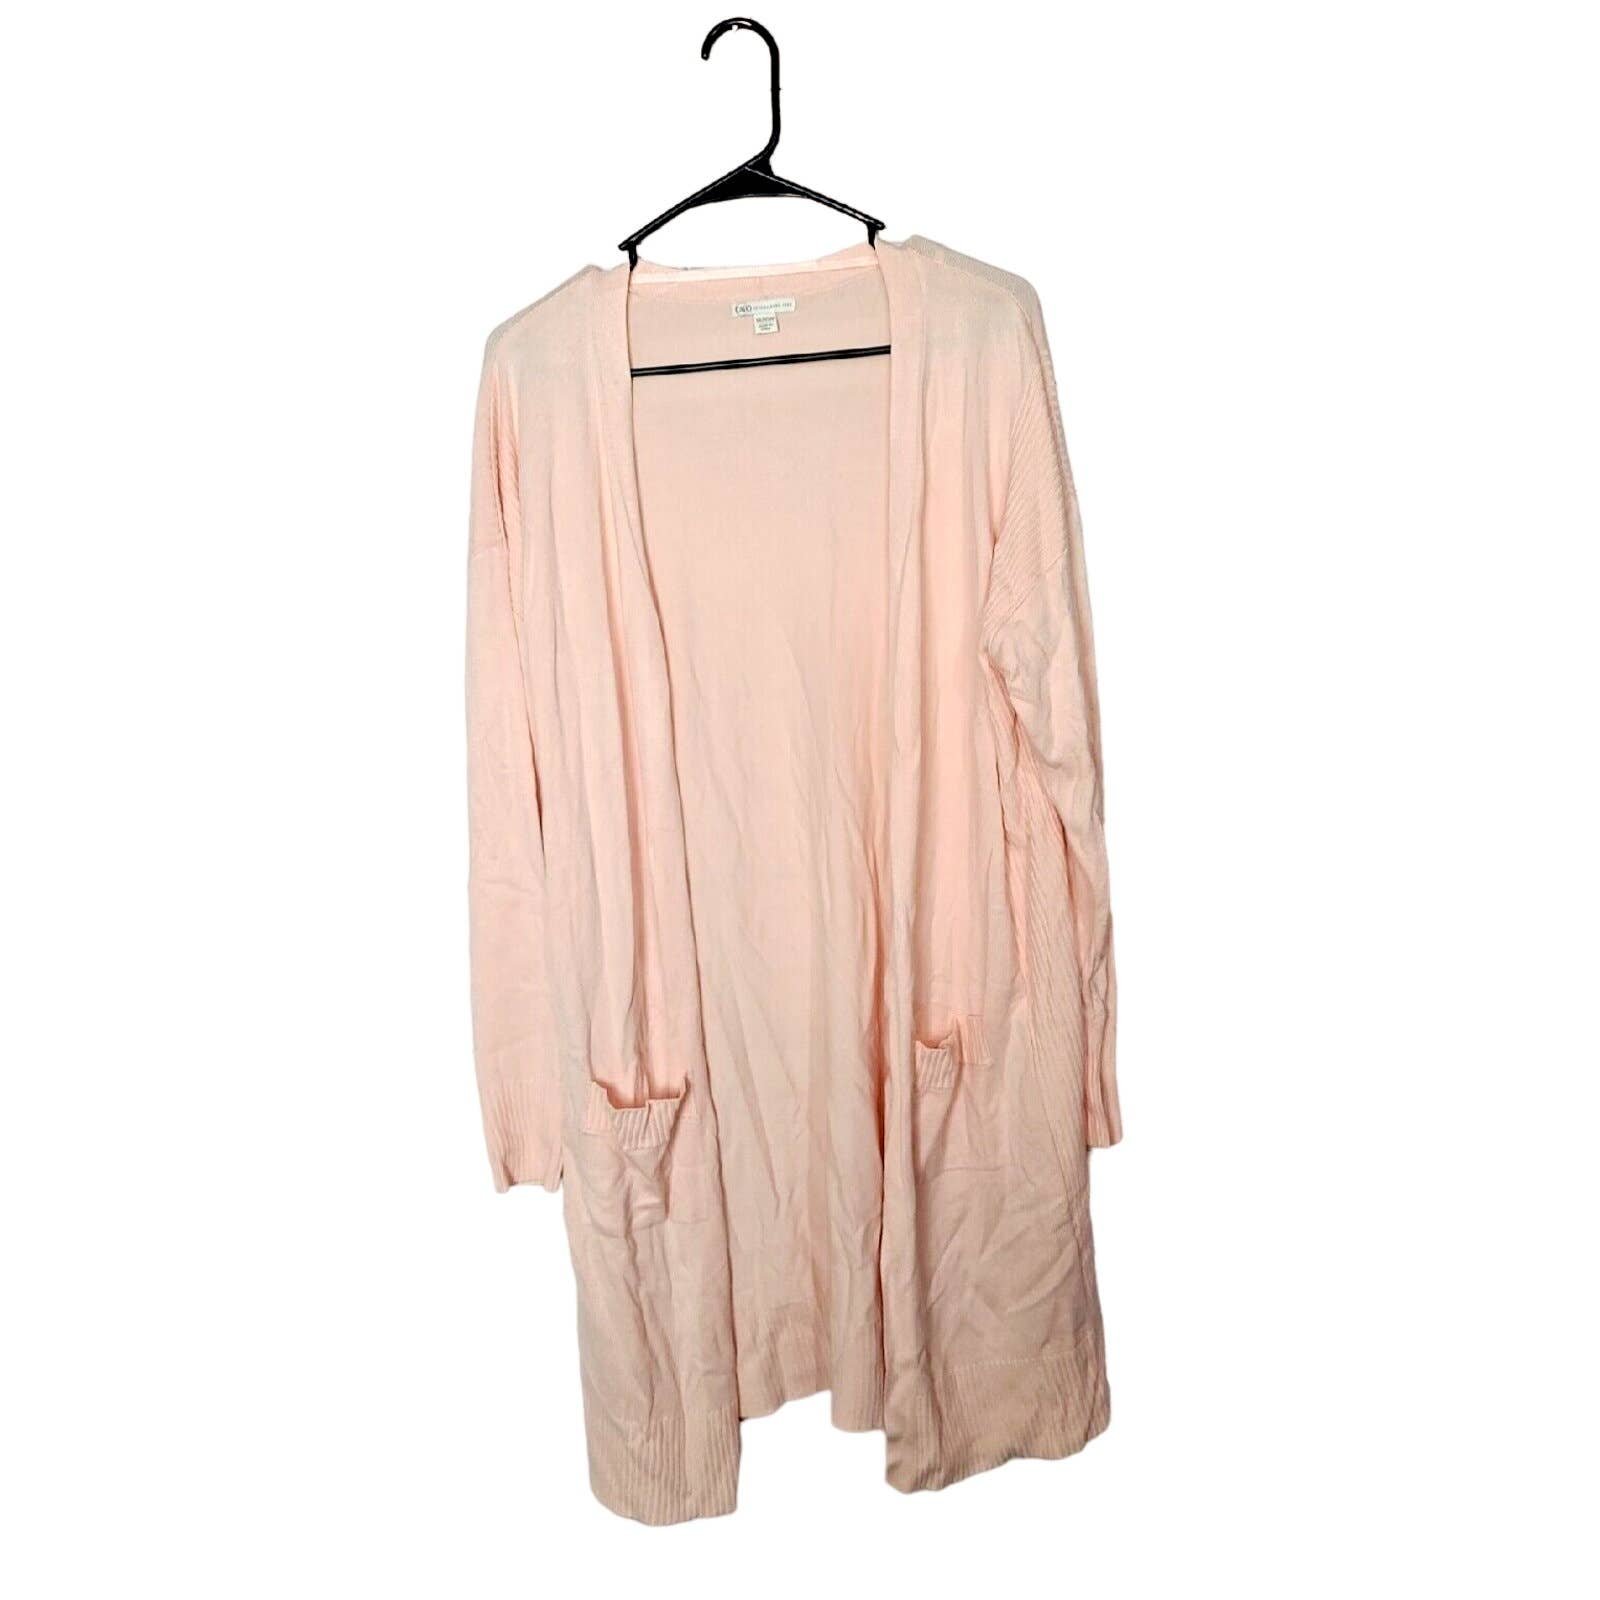 Cato Peach Open Long Sleeve Duster Cardigan Sweater Wom